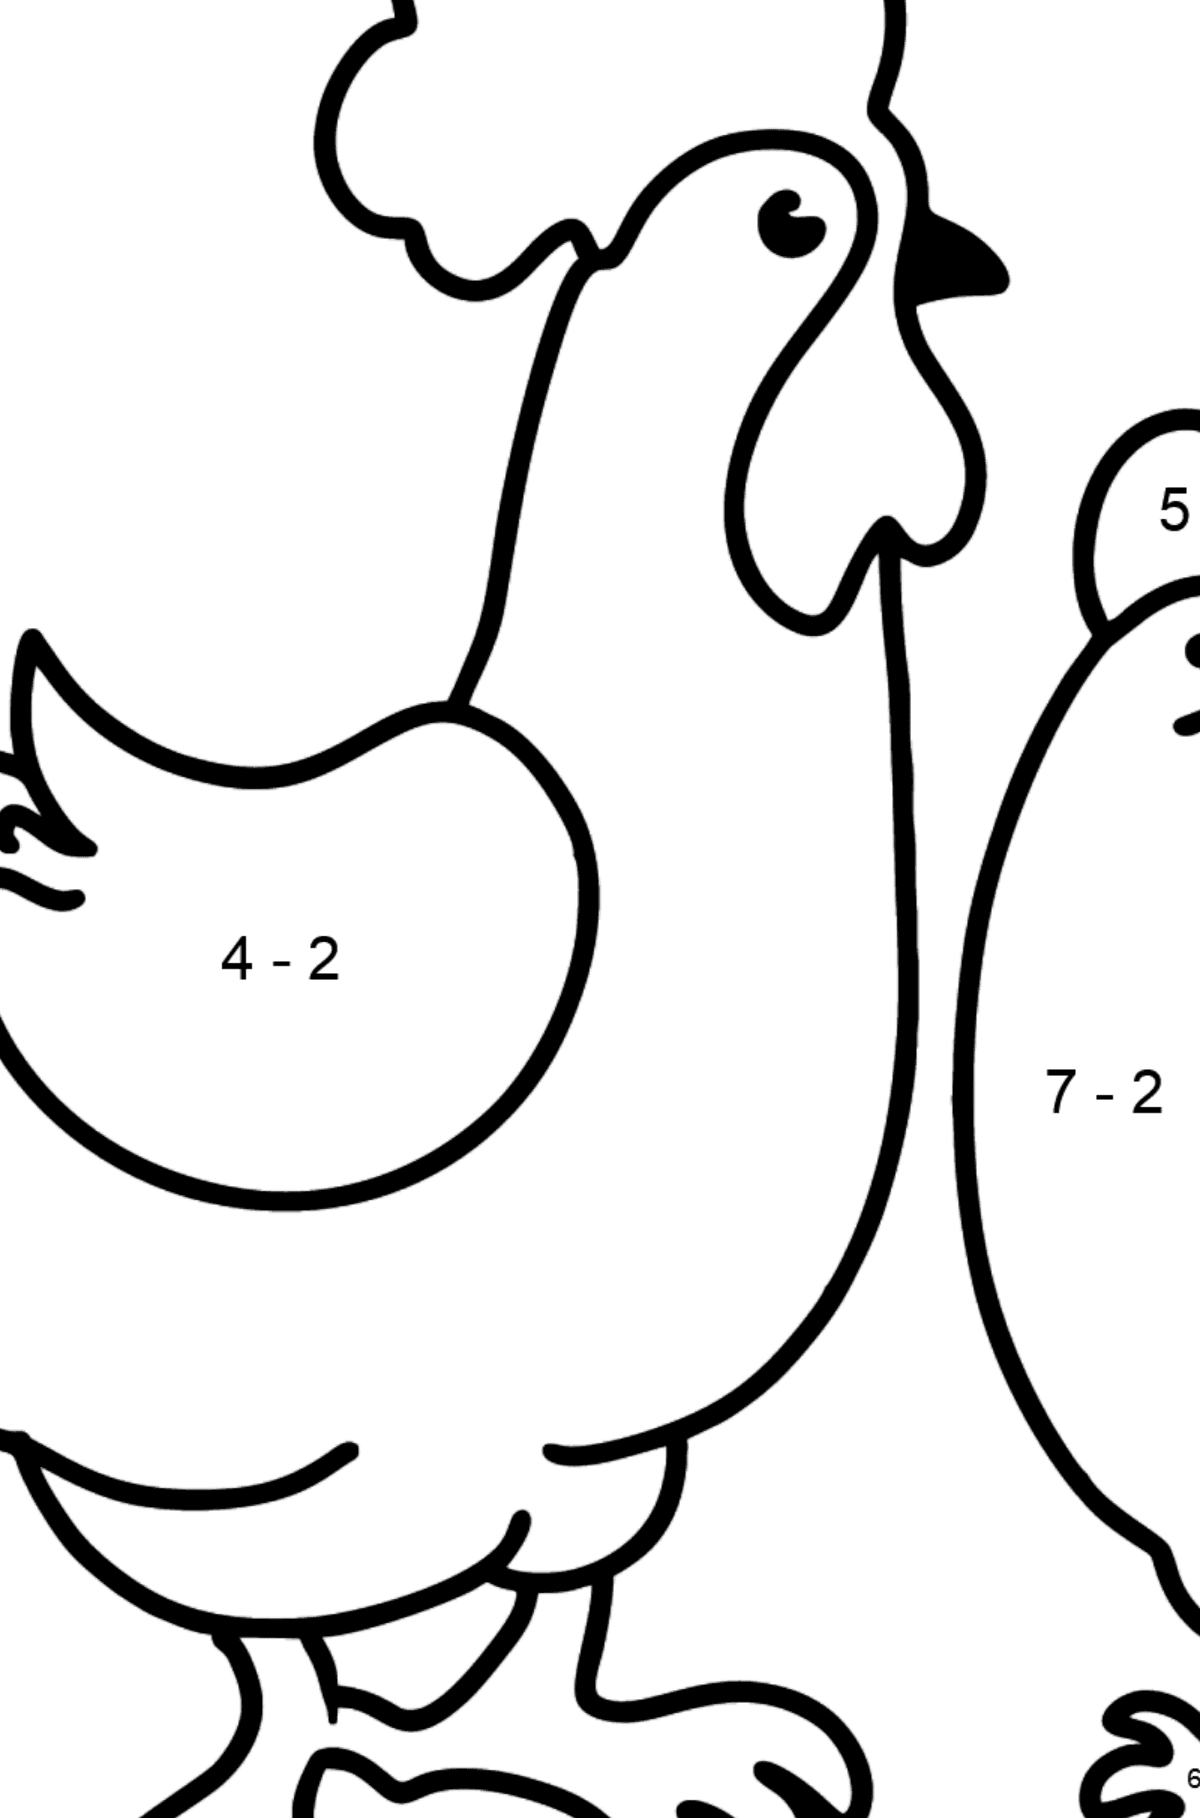 Rooster and Hen coloring page - Math Coloring - Subtraction for Kids